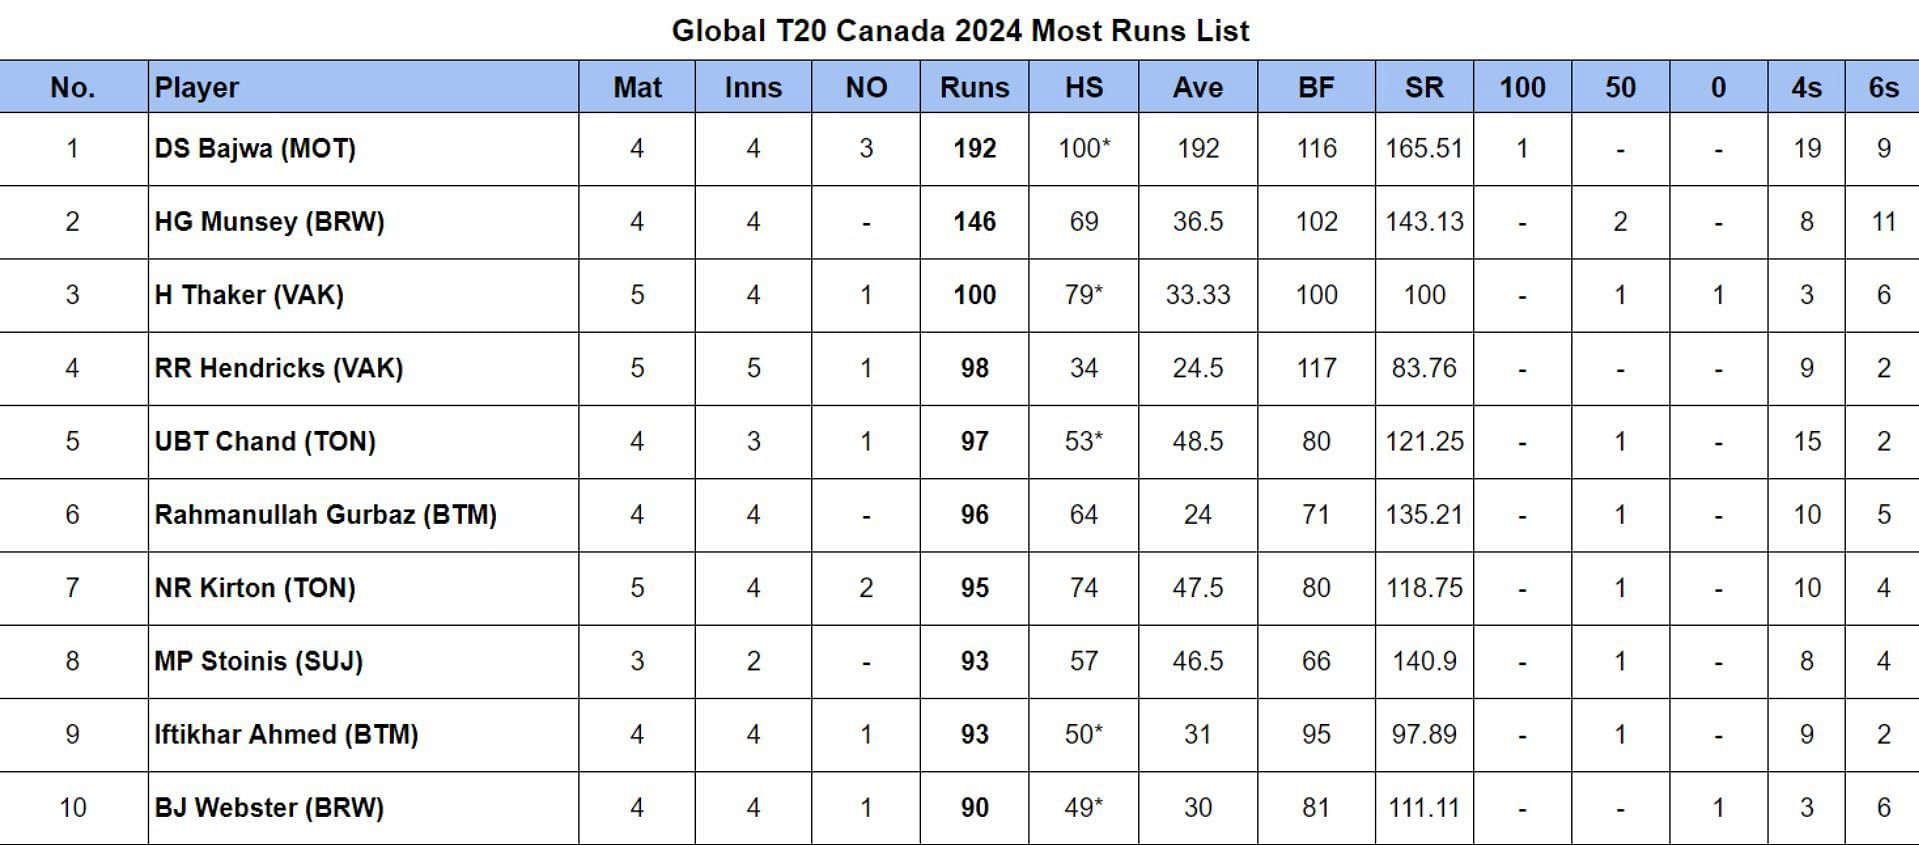 Global T20 Canada 2024 Most Runs and Most Wickets after Vancouver Knights vs Surrey Jaguars (Updated) ft. Dilpreet Bajwa & Jason Behrendorff